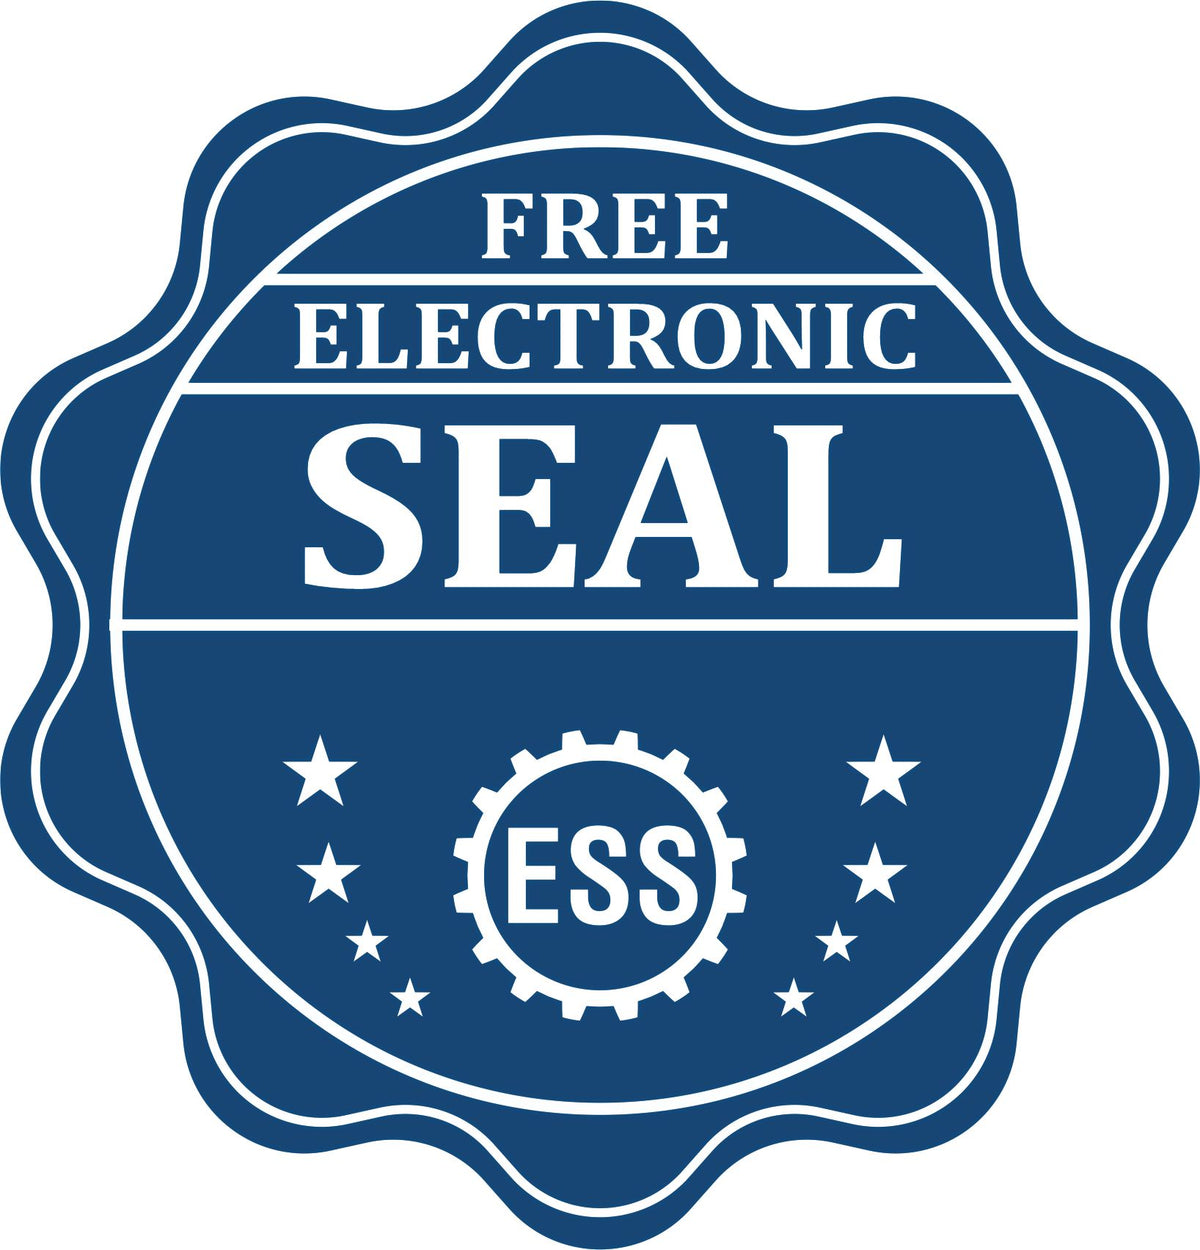 A badge showing a free electronic seal for the Handheld Texas Professional Engineer Embosser with stars and the ESS gear on the emblem.